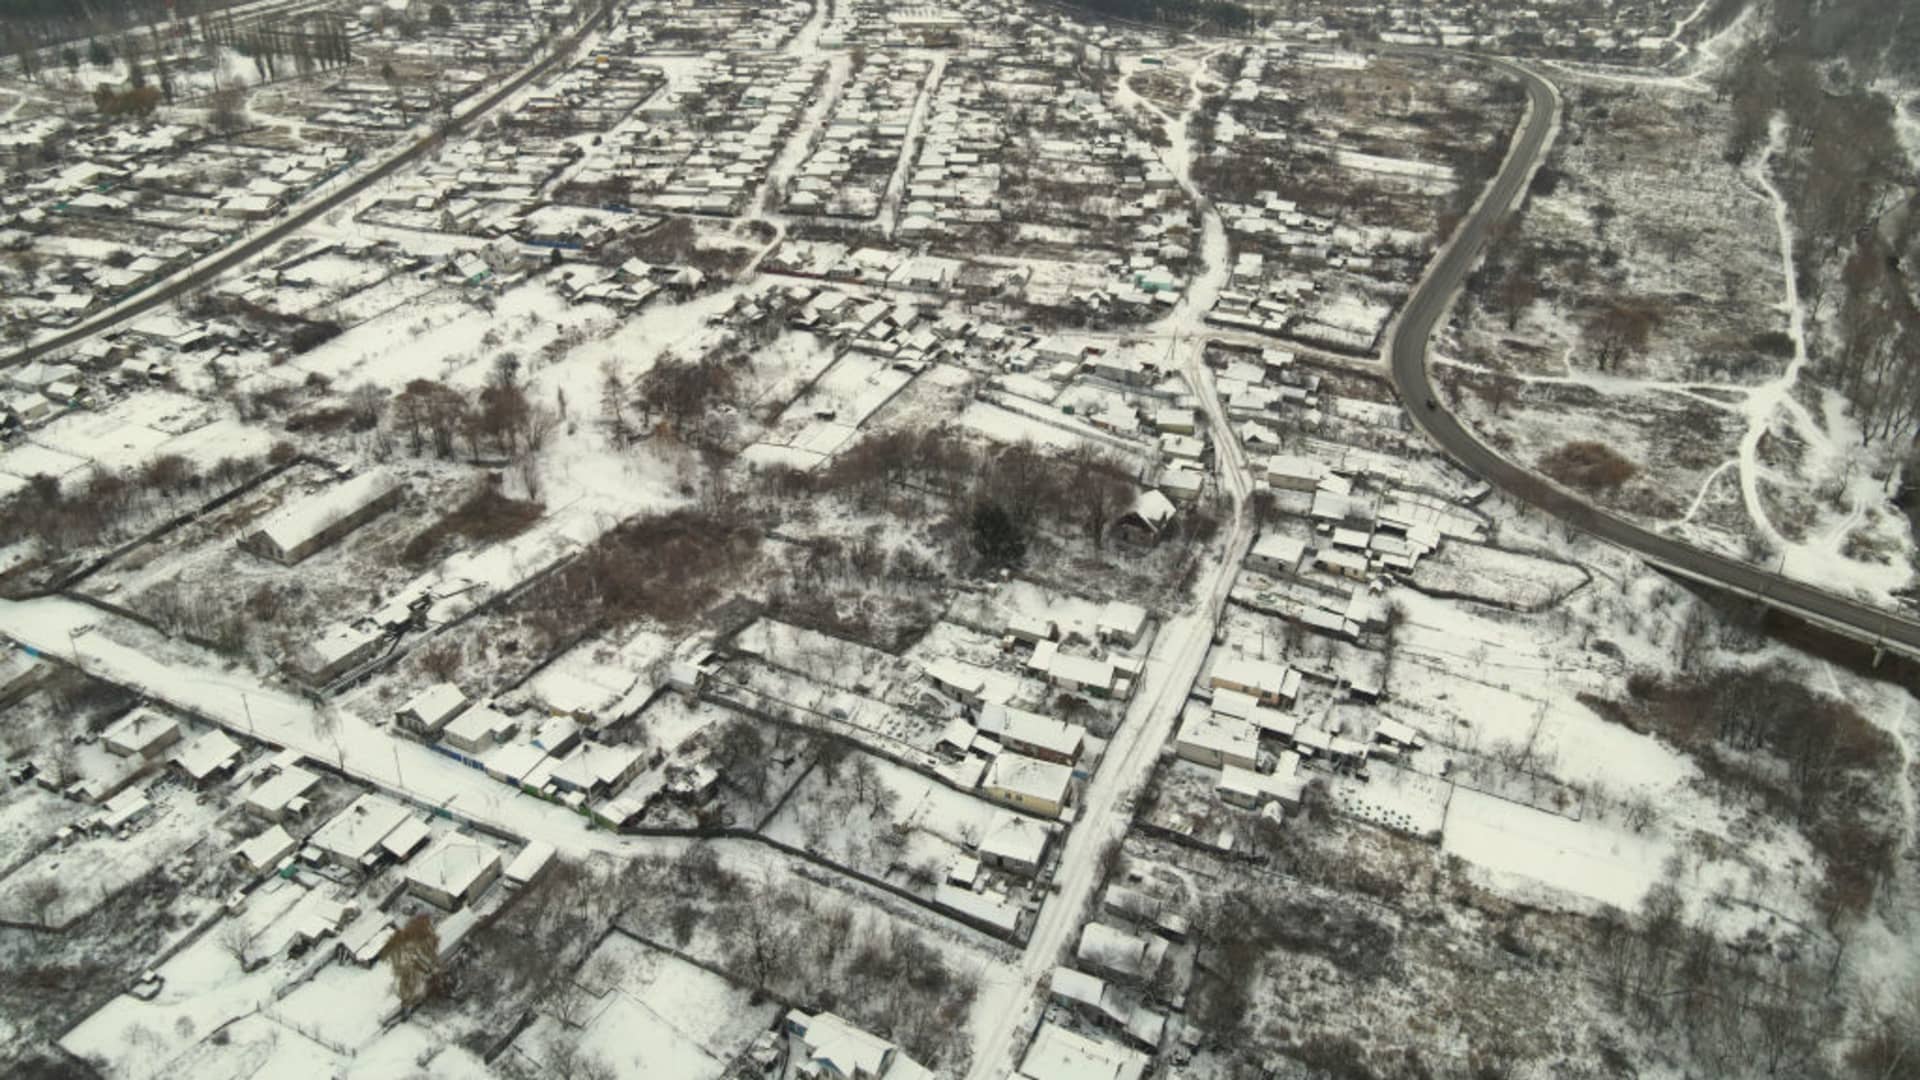 The snow-bound city of Kreminna, which is believed to have fallen to Russian forces, is seen here from a birds eye view. The city is located in the Luhansk region in eastern Ukraine.